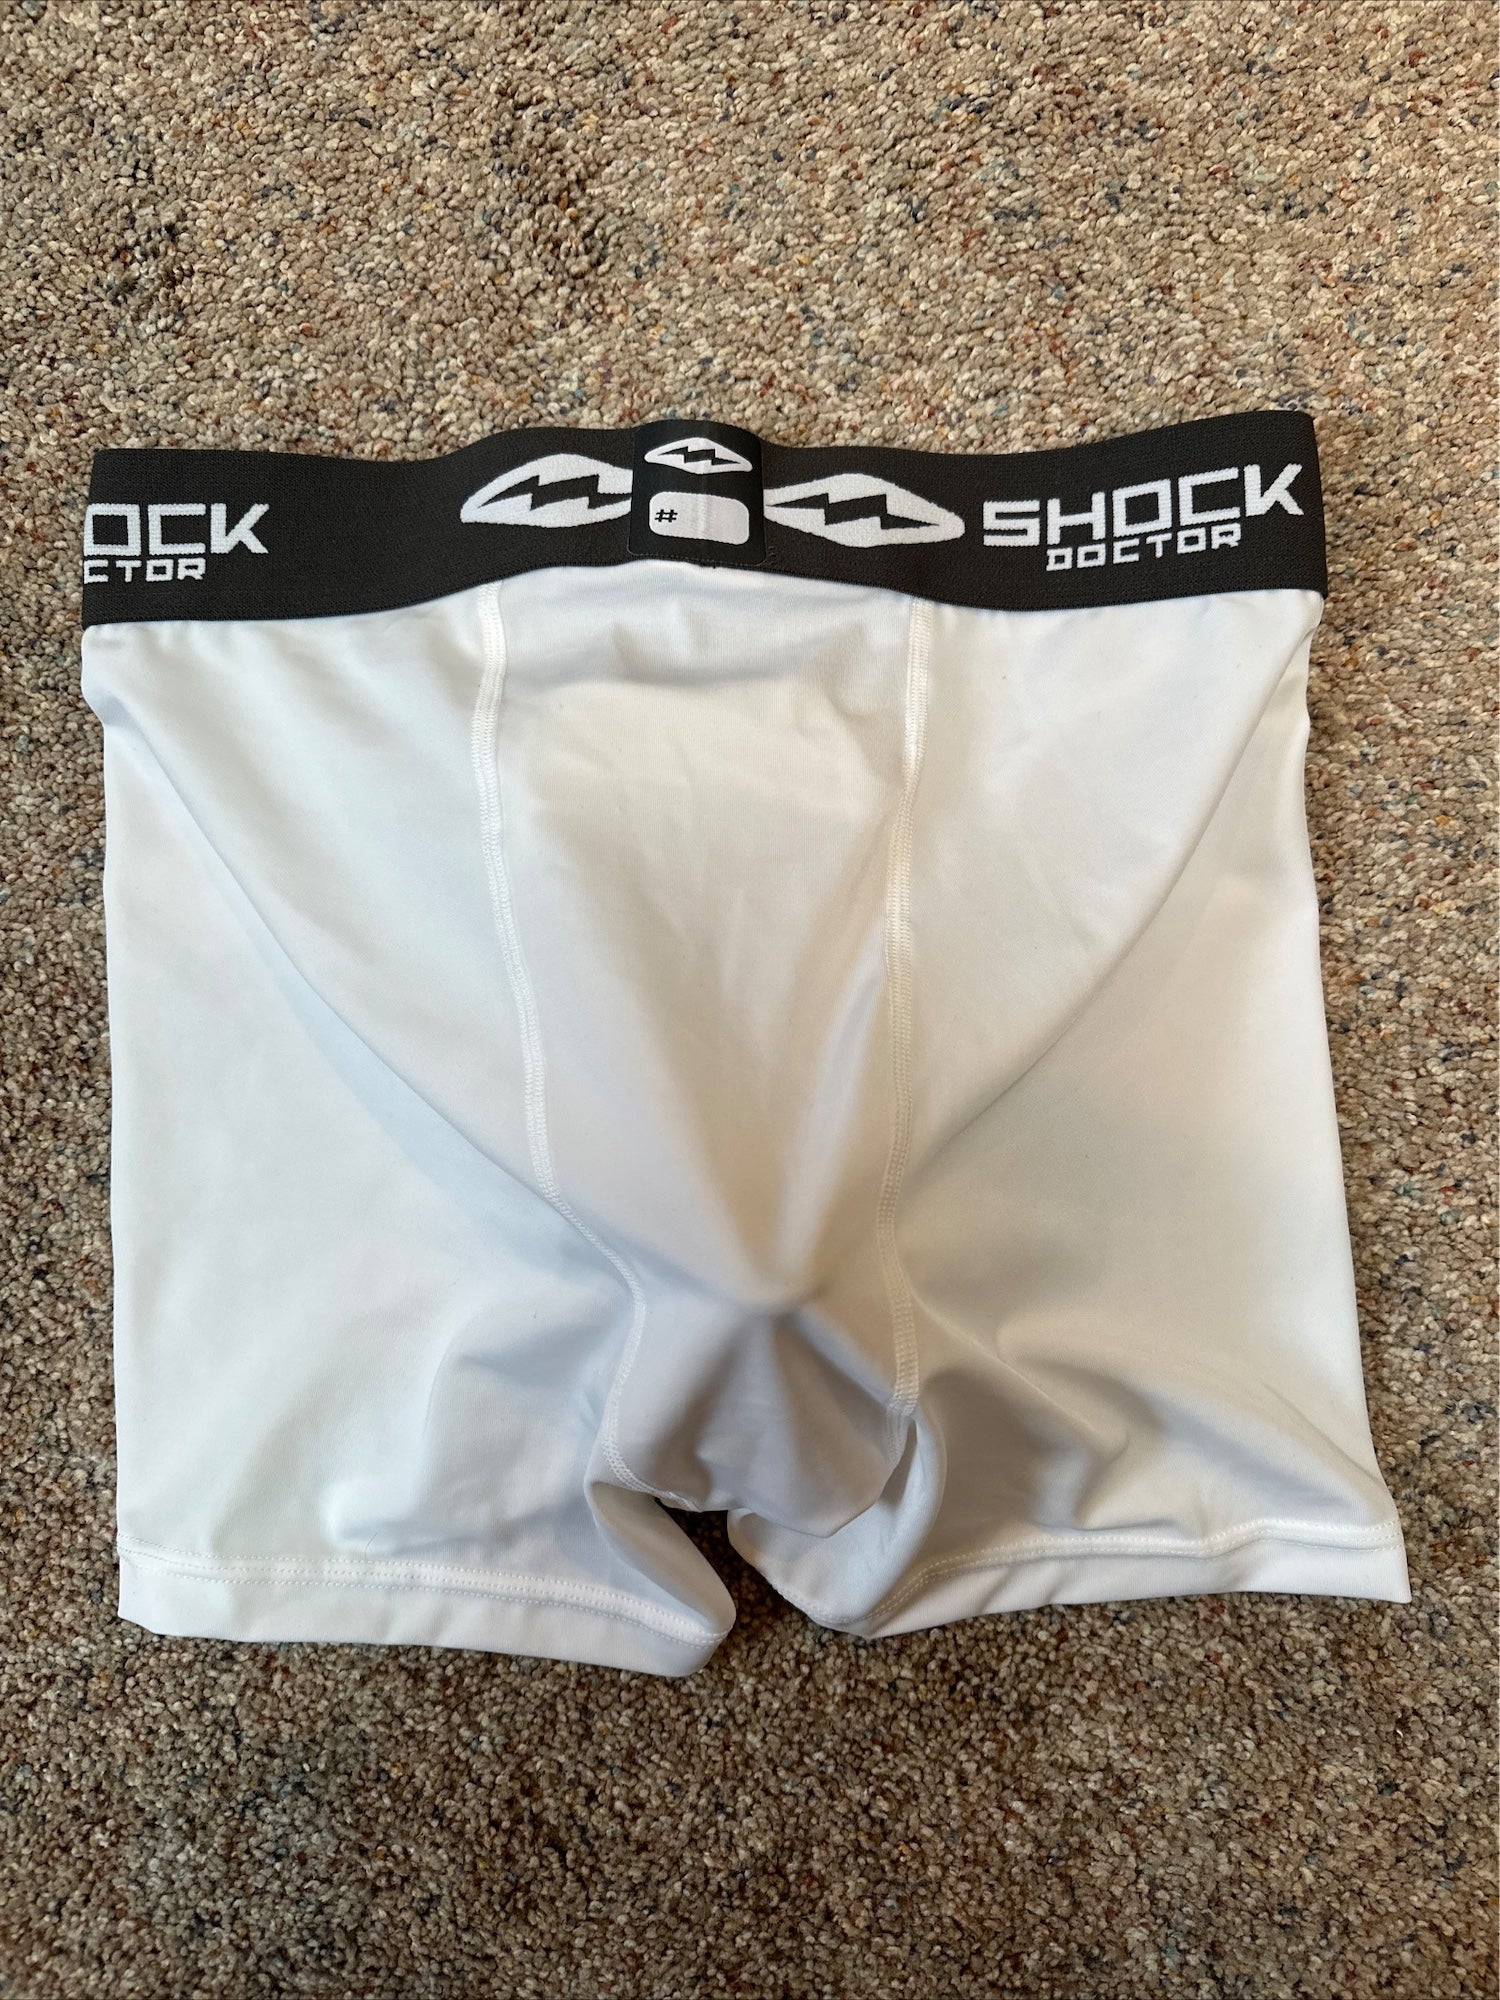 Shock Doctor Core Compression Shorts with Bio-Flex Cup – Brine Sporting  Goods